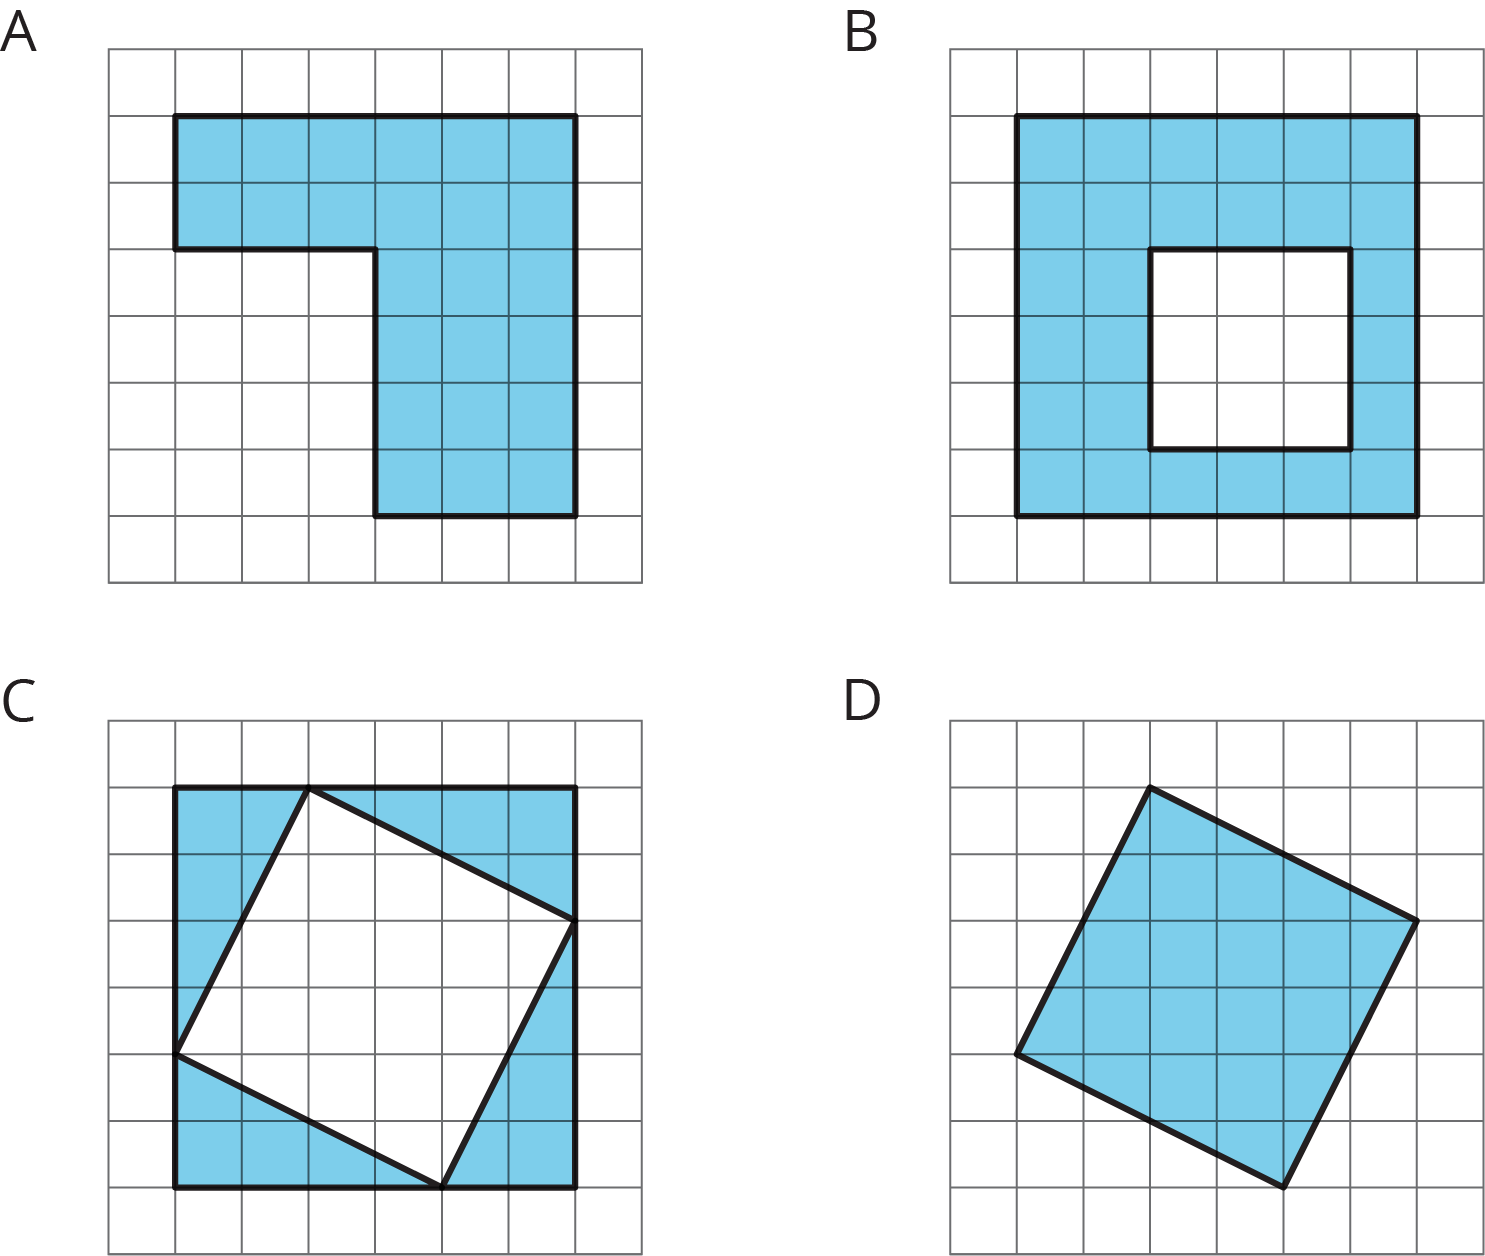 Four figures, each on a white square grid. Figure A is a green corner piece with 6 sides. Figure B a 6 by 6 green square with a 3 by 3 white square inside. Figure C a 6 by 6 green square with a tilted white square inside. Figure D is a green tilted square.